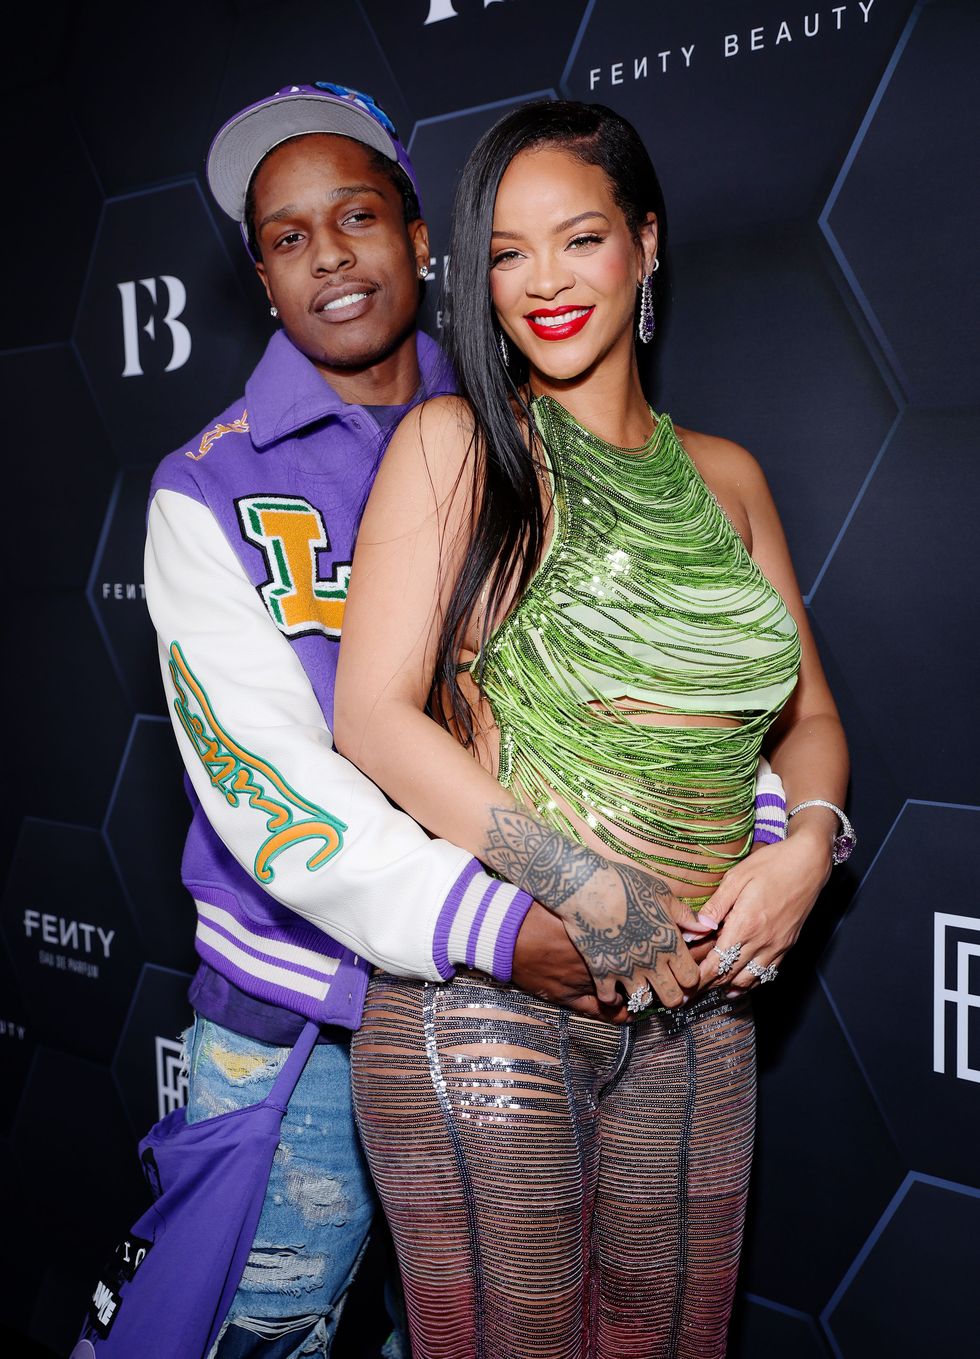 ASAP Rocky and Rihanna's big fits are preparing us for something even  bigger